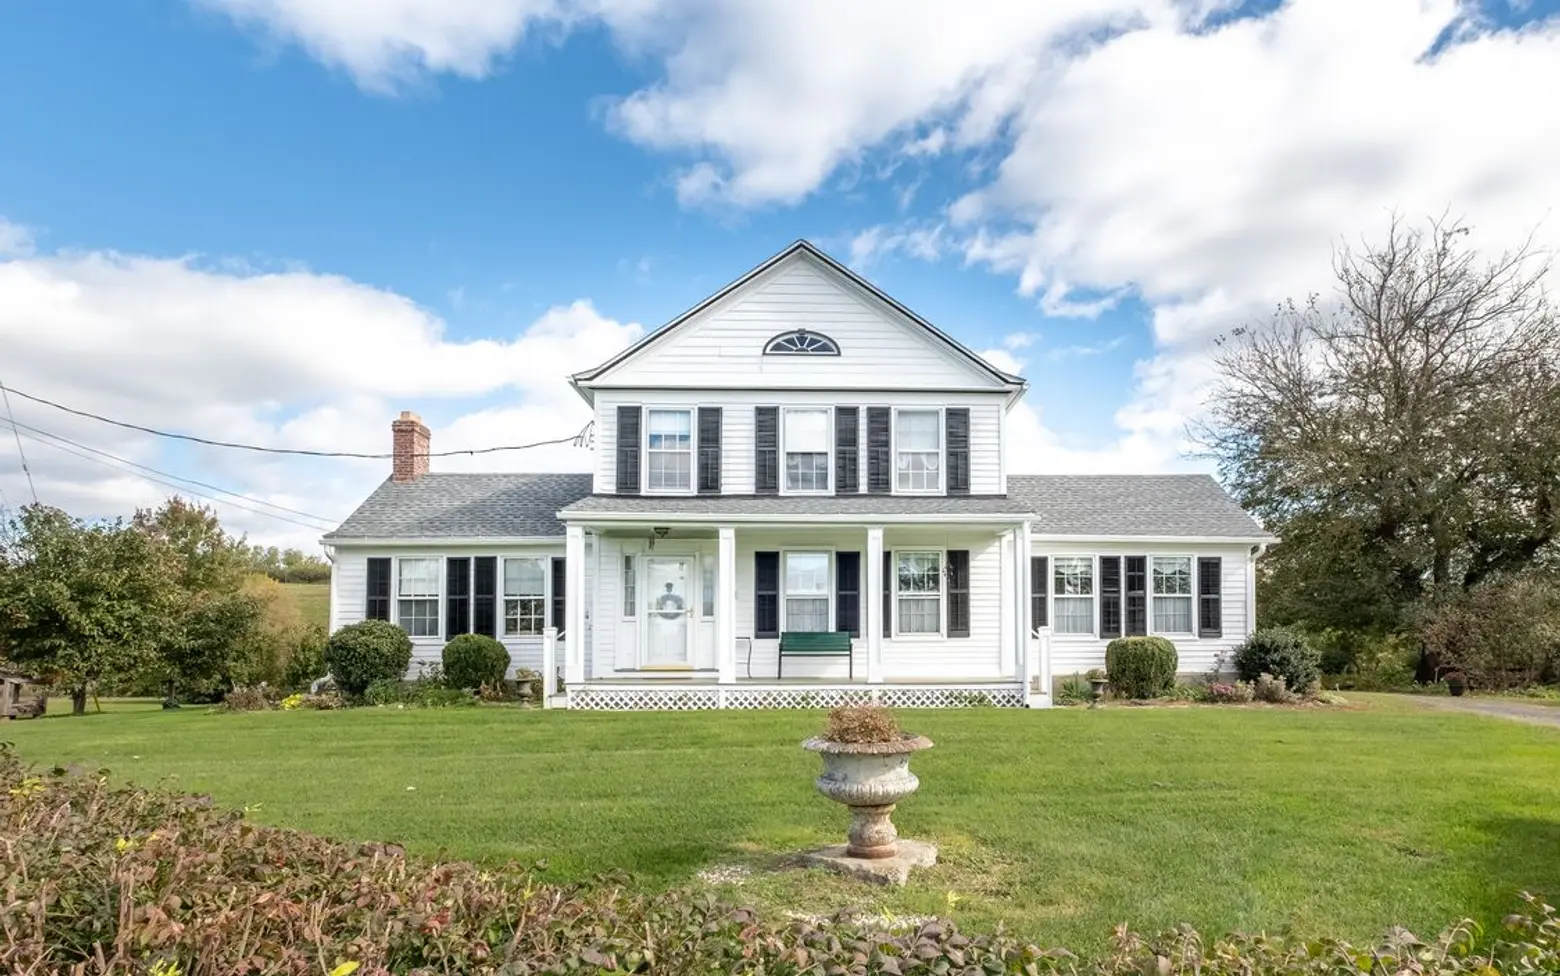 This upstate farmhouse comes with 30+ acres and an abundant fruit orchard for just under $700K